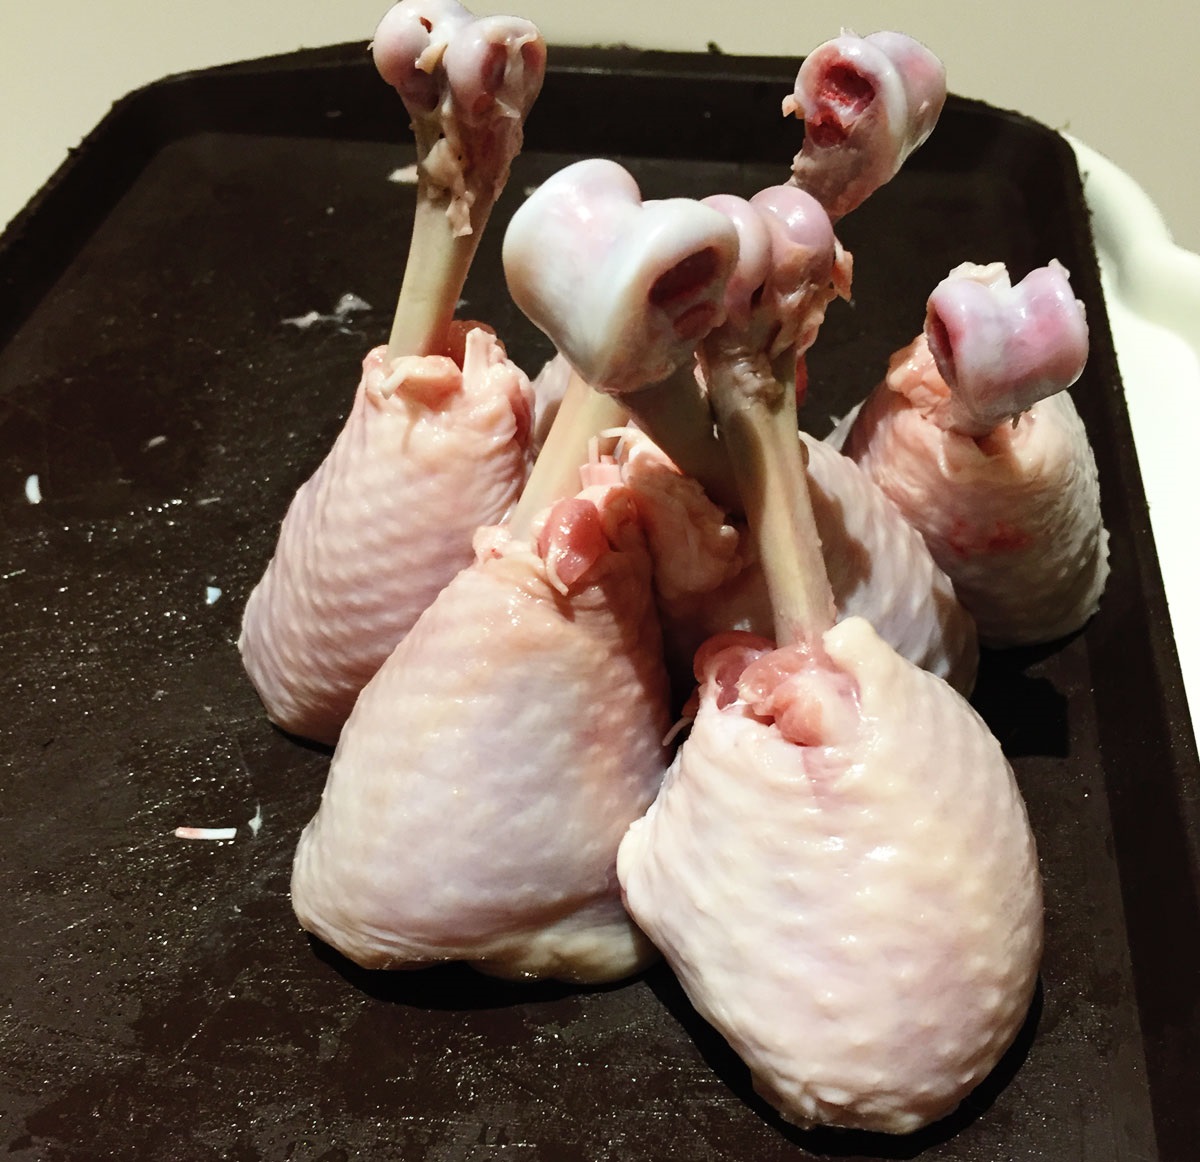 Prepare your chicken legs by pulling back the meat from the bone.